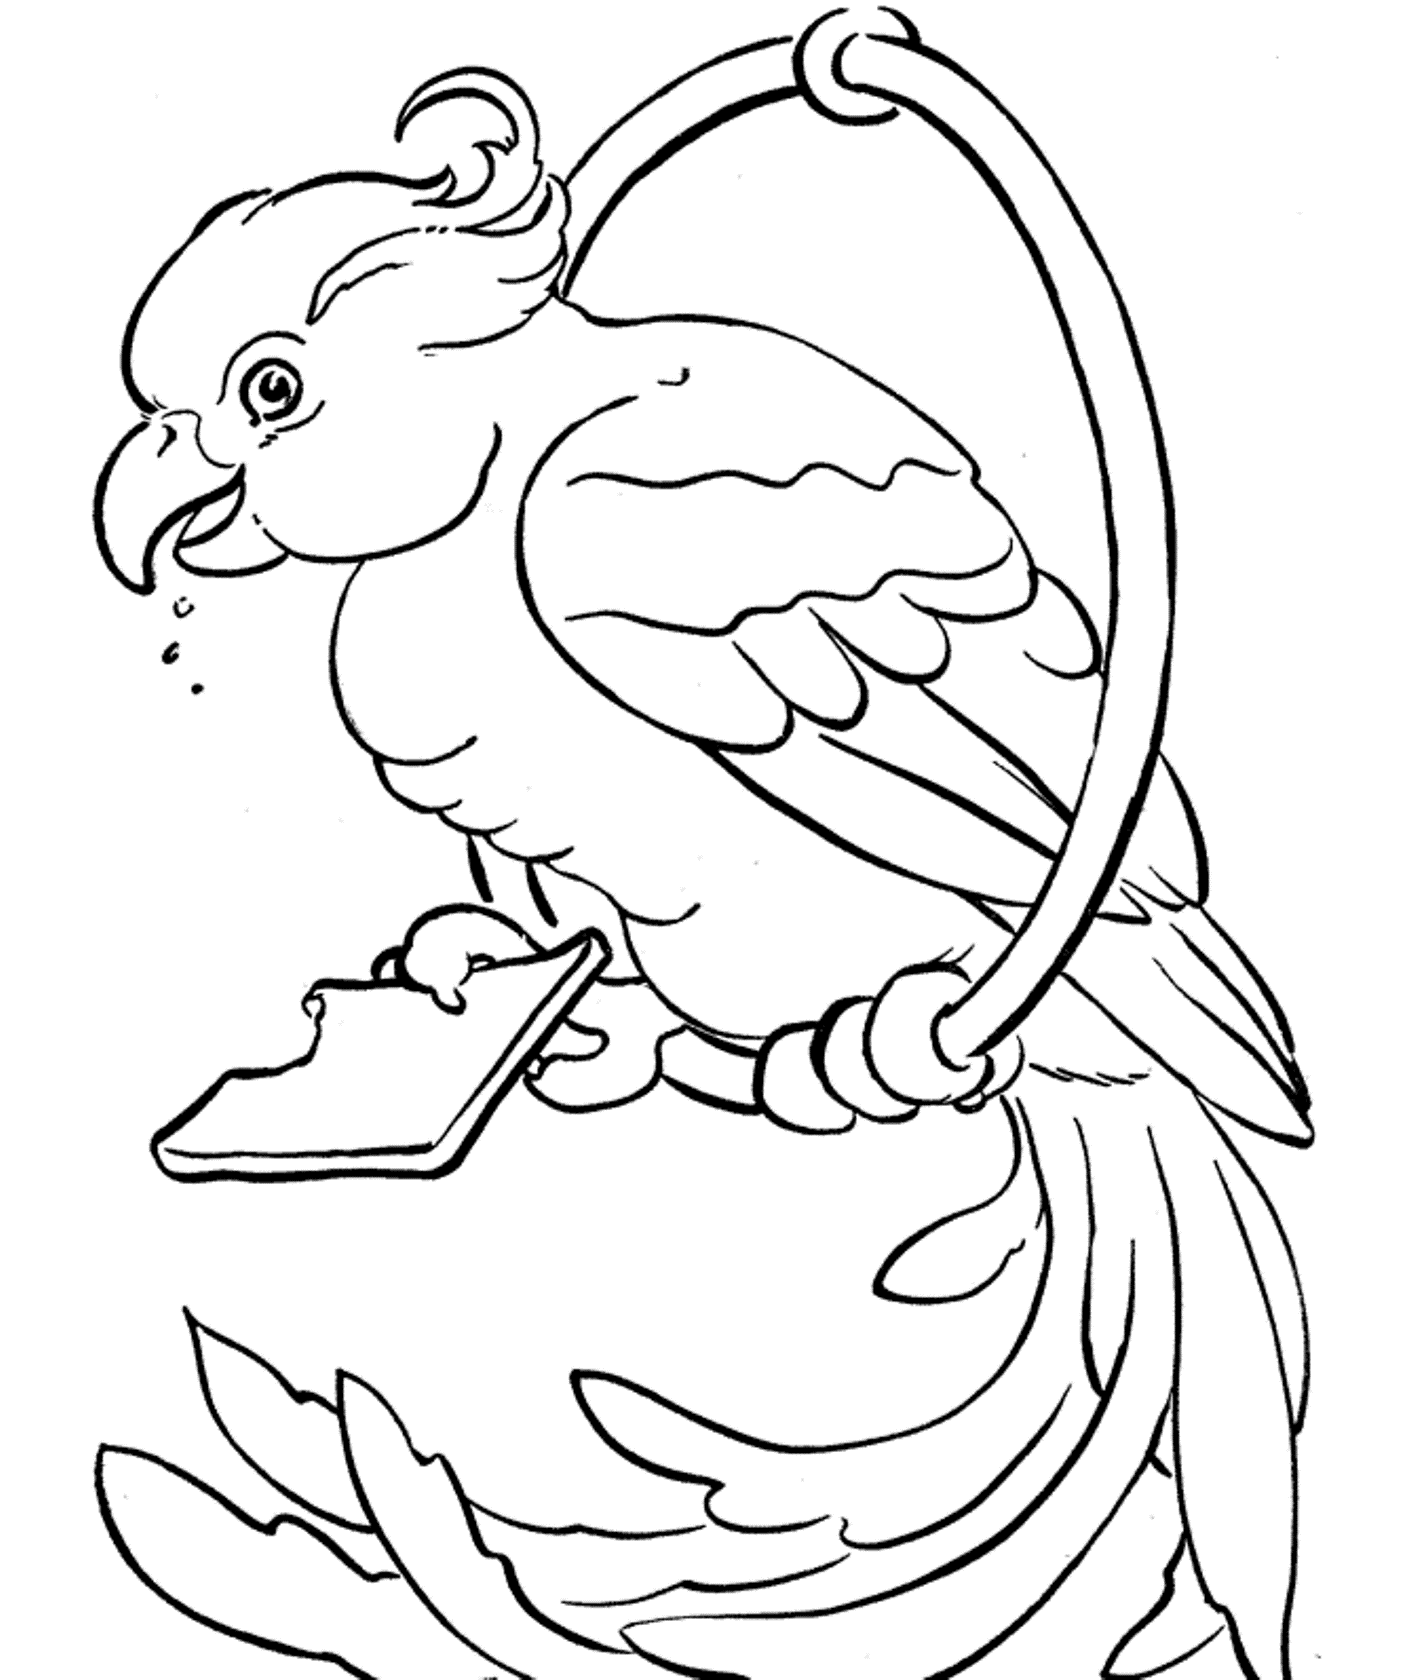 pictures of parrots to colour parrots coloring pages to download and print for free colour pictures of to parrots 